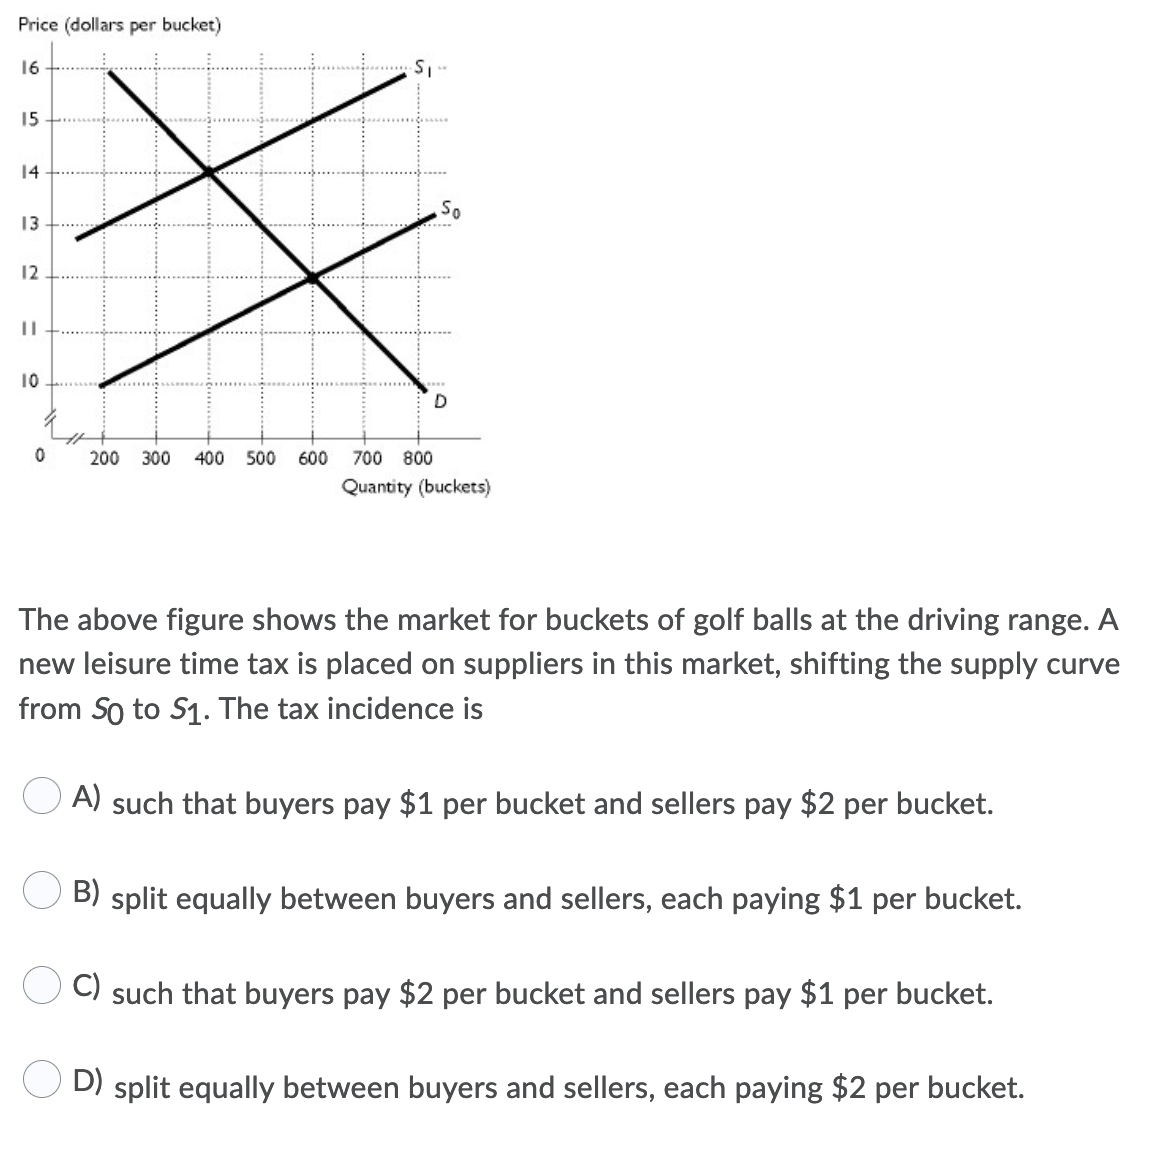 Price (dollars per bucket)
16
15
14
13
12
10
200 300
400
500
600
700
800
Quantity (buckets)
The above figure shows the market for buckets of golf balls at the driving range. A
new leisure time tax is placed on suppliers in this market, shifting the supply curve
from So to S1. The tax incidence is
A) such that buyers pay $1 per bucket and sellers pay $2 per bucket.
B) split equally between buyers and sellers, each paying $1 per bucket.
C) such that buyers pay $2 per bucket and sellers pay $1 per bucket.
O D) split equally between buyers and sellers, each paying $2 per bucket.
%3D
